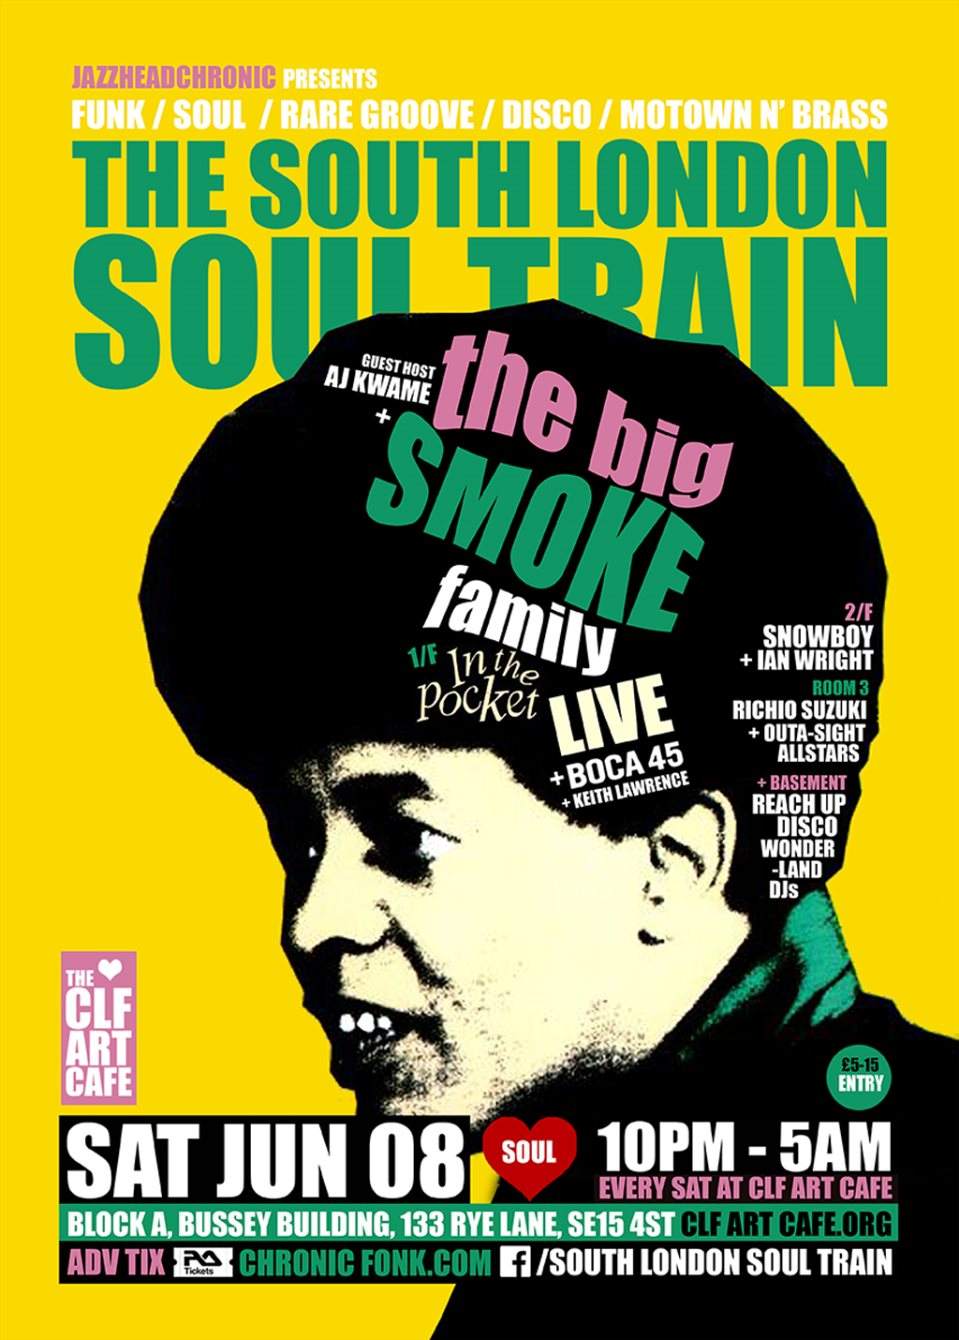 The South London Soul Train with The Big Smoke Family (Live) - More - Página frontal